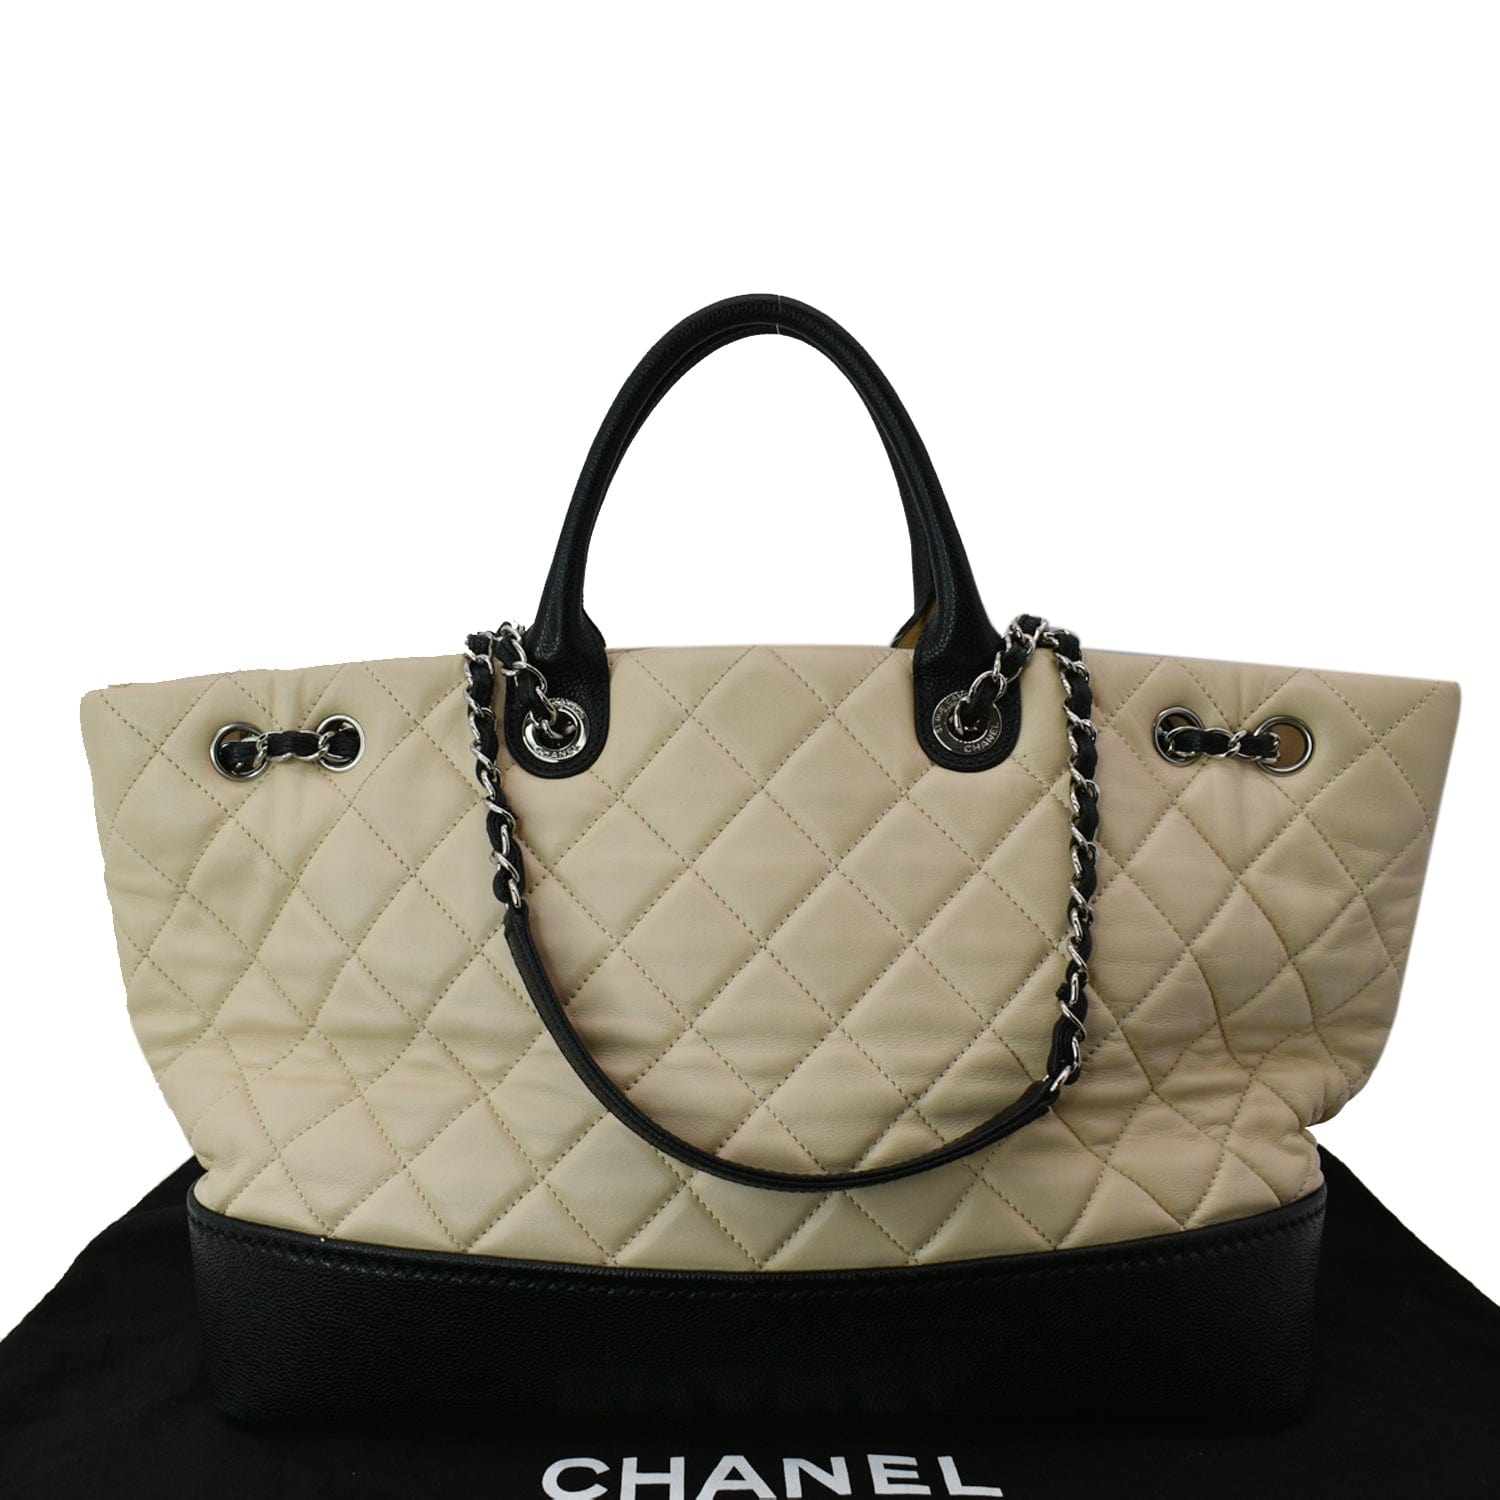 Chanel Square Quilt Tweed Tote - Brown Totes, Handbags - CHA802786